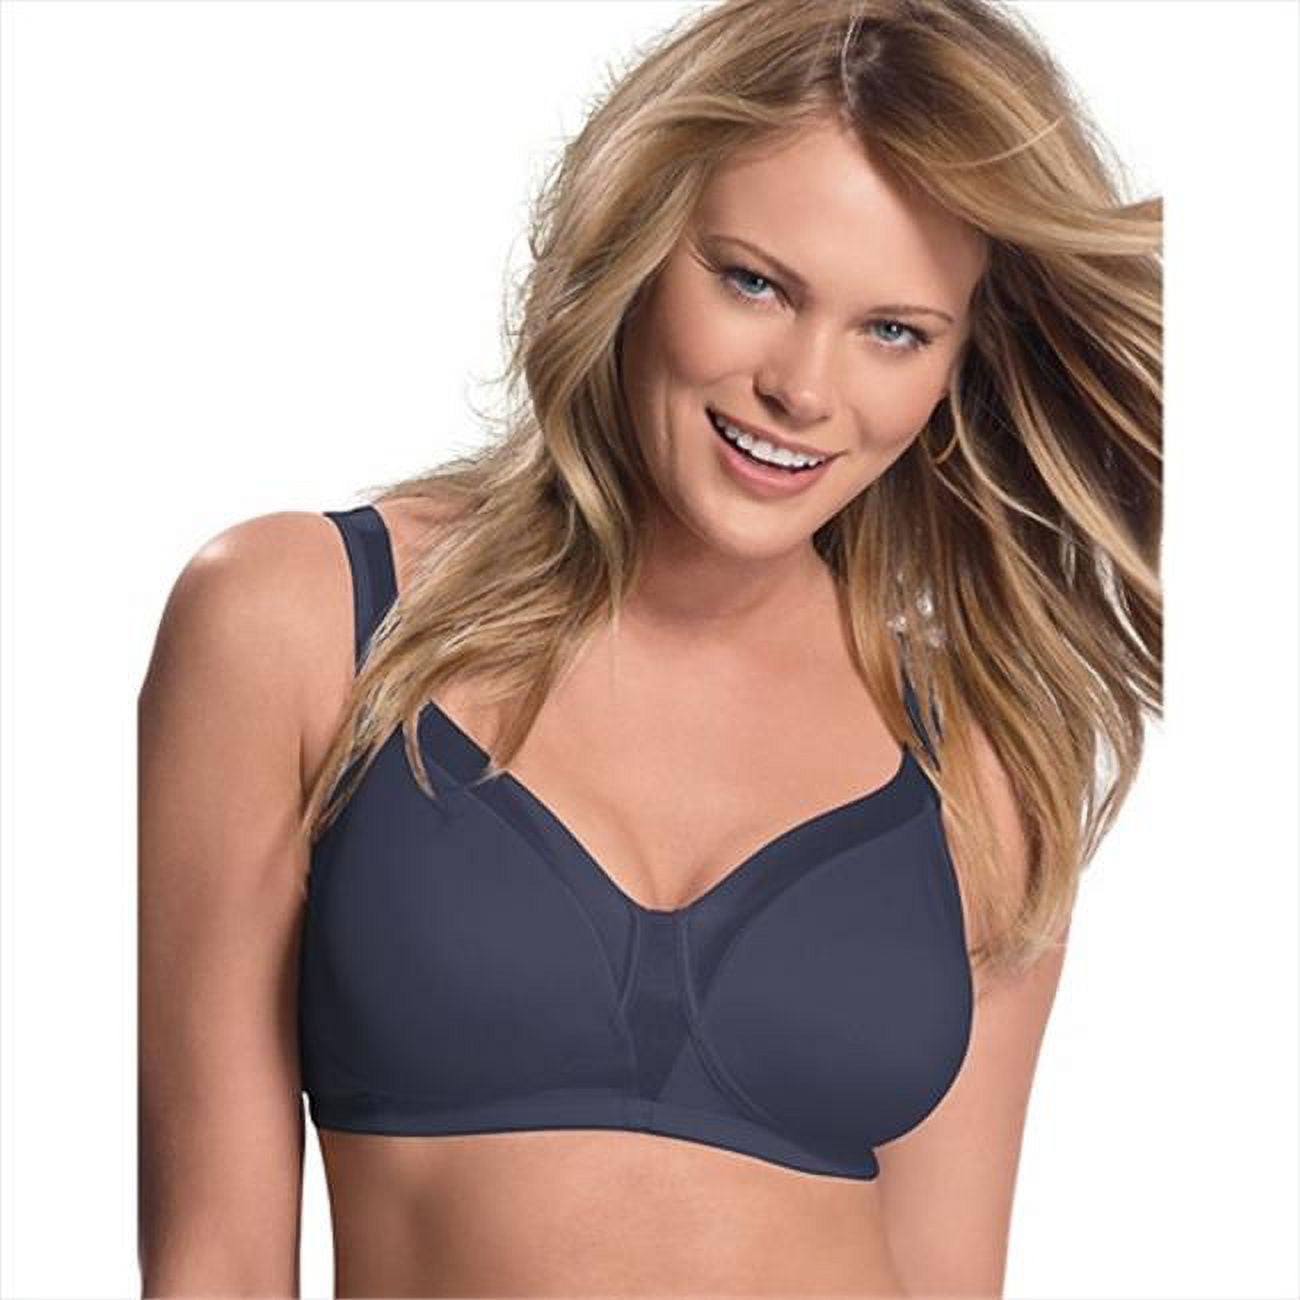 PLAYTEX Women's 18 Hour Silky Soft Smoothing Wireless Bra Us4803 Available  with 2-Pack Option, 2 Pack - Private Jet/Nude, 40C